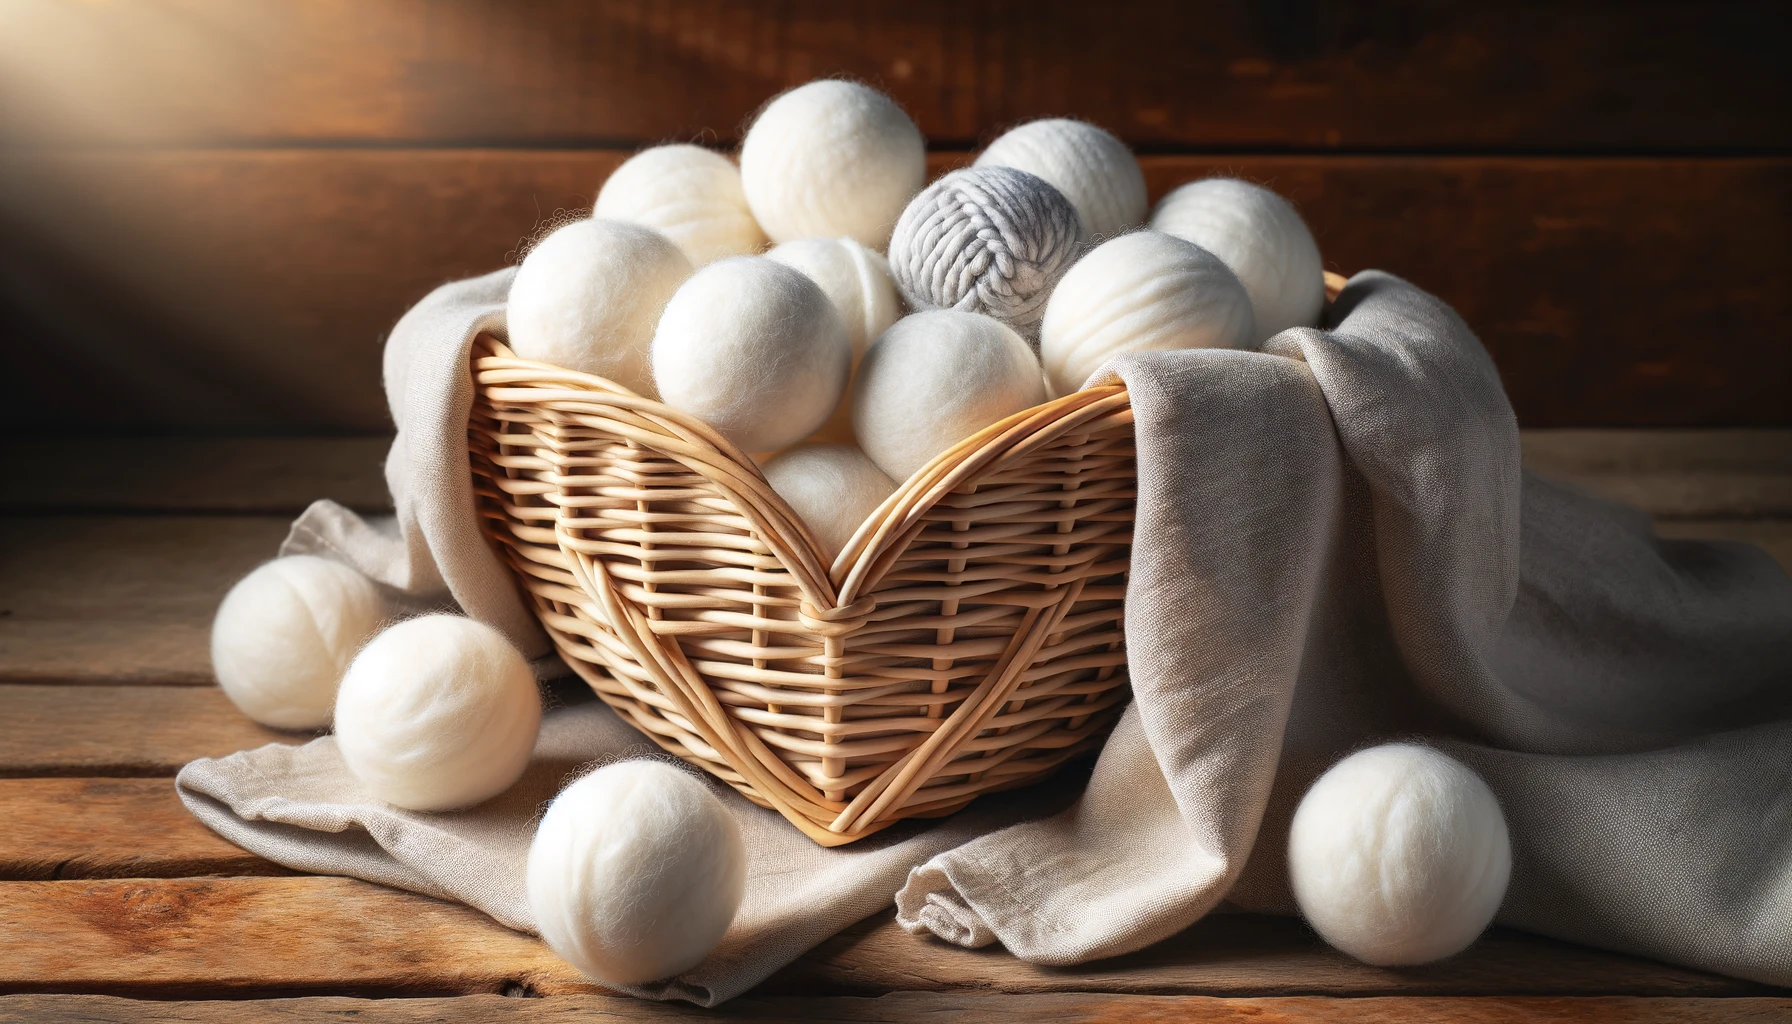 Heart-shaped wicker basket filled with white wool dryer balls on a wooden surface with a grey linen cloth.